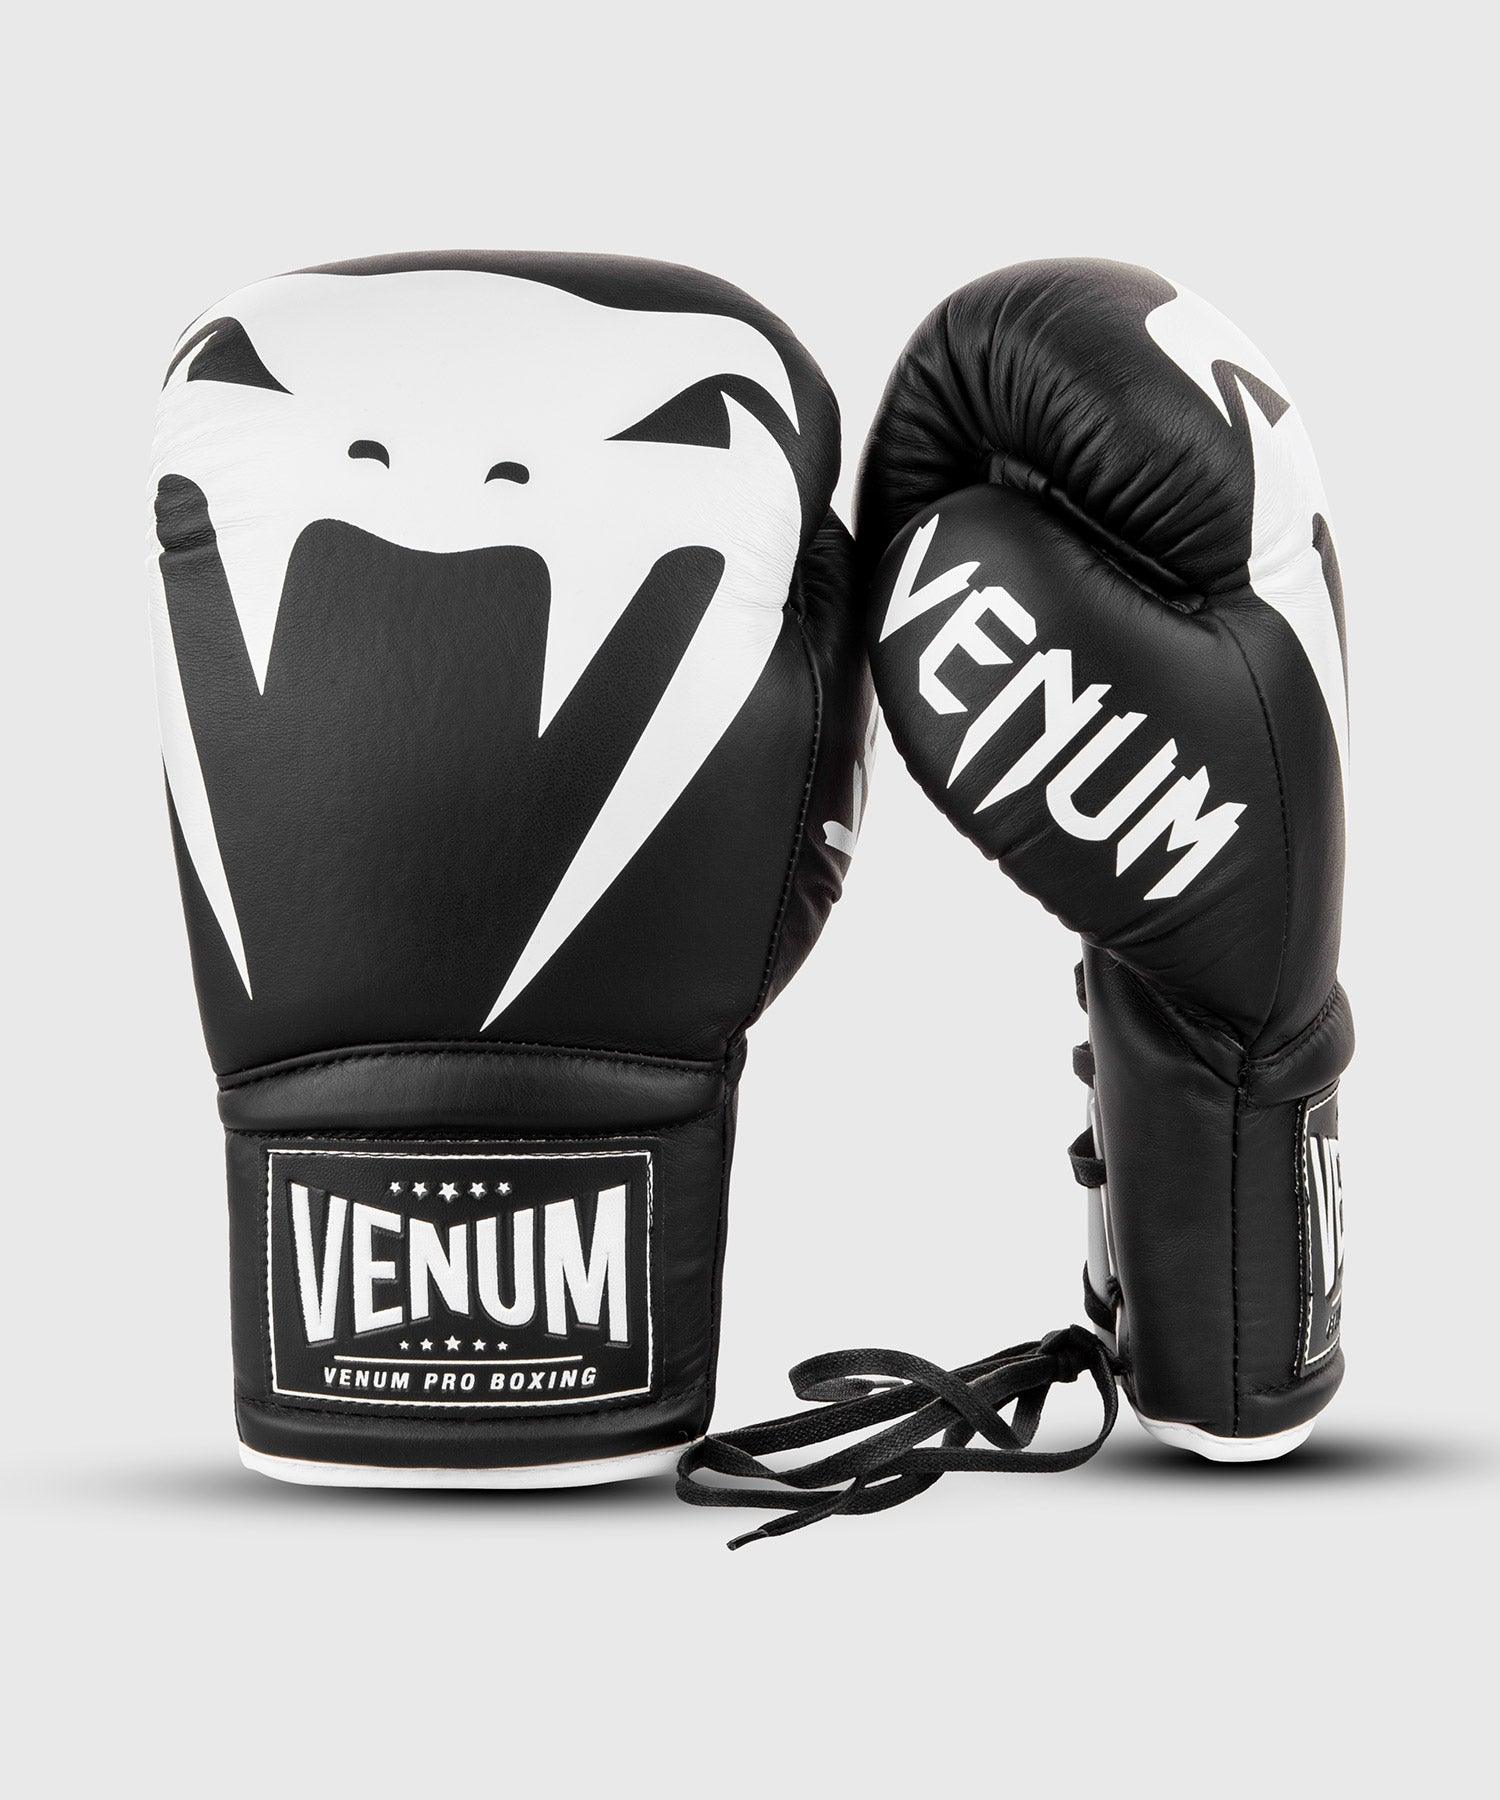 Venum Giant 2.0 Pro Boxing Gloves - With Laces - Black/White Picture 2